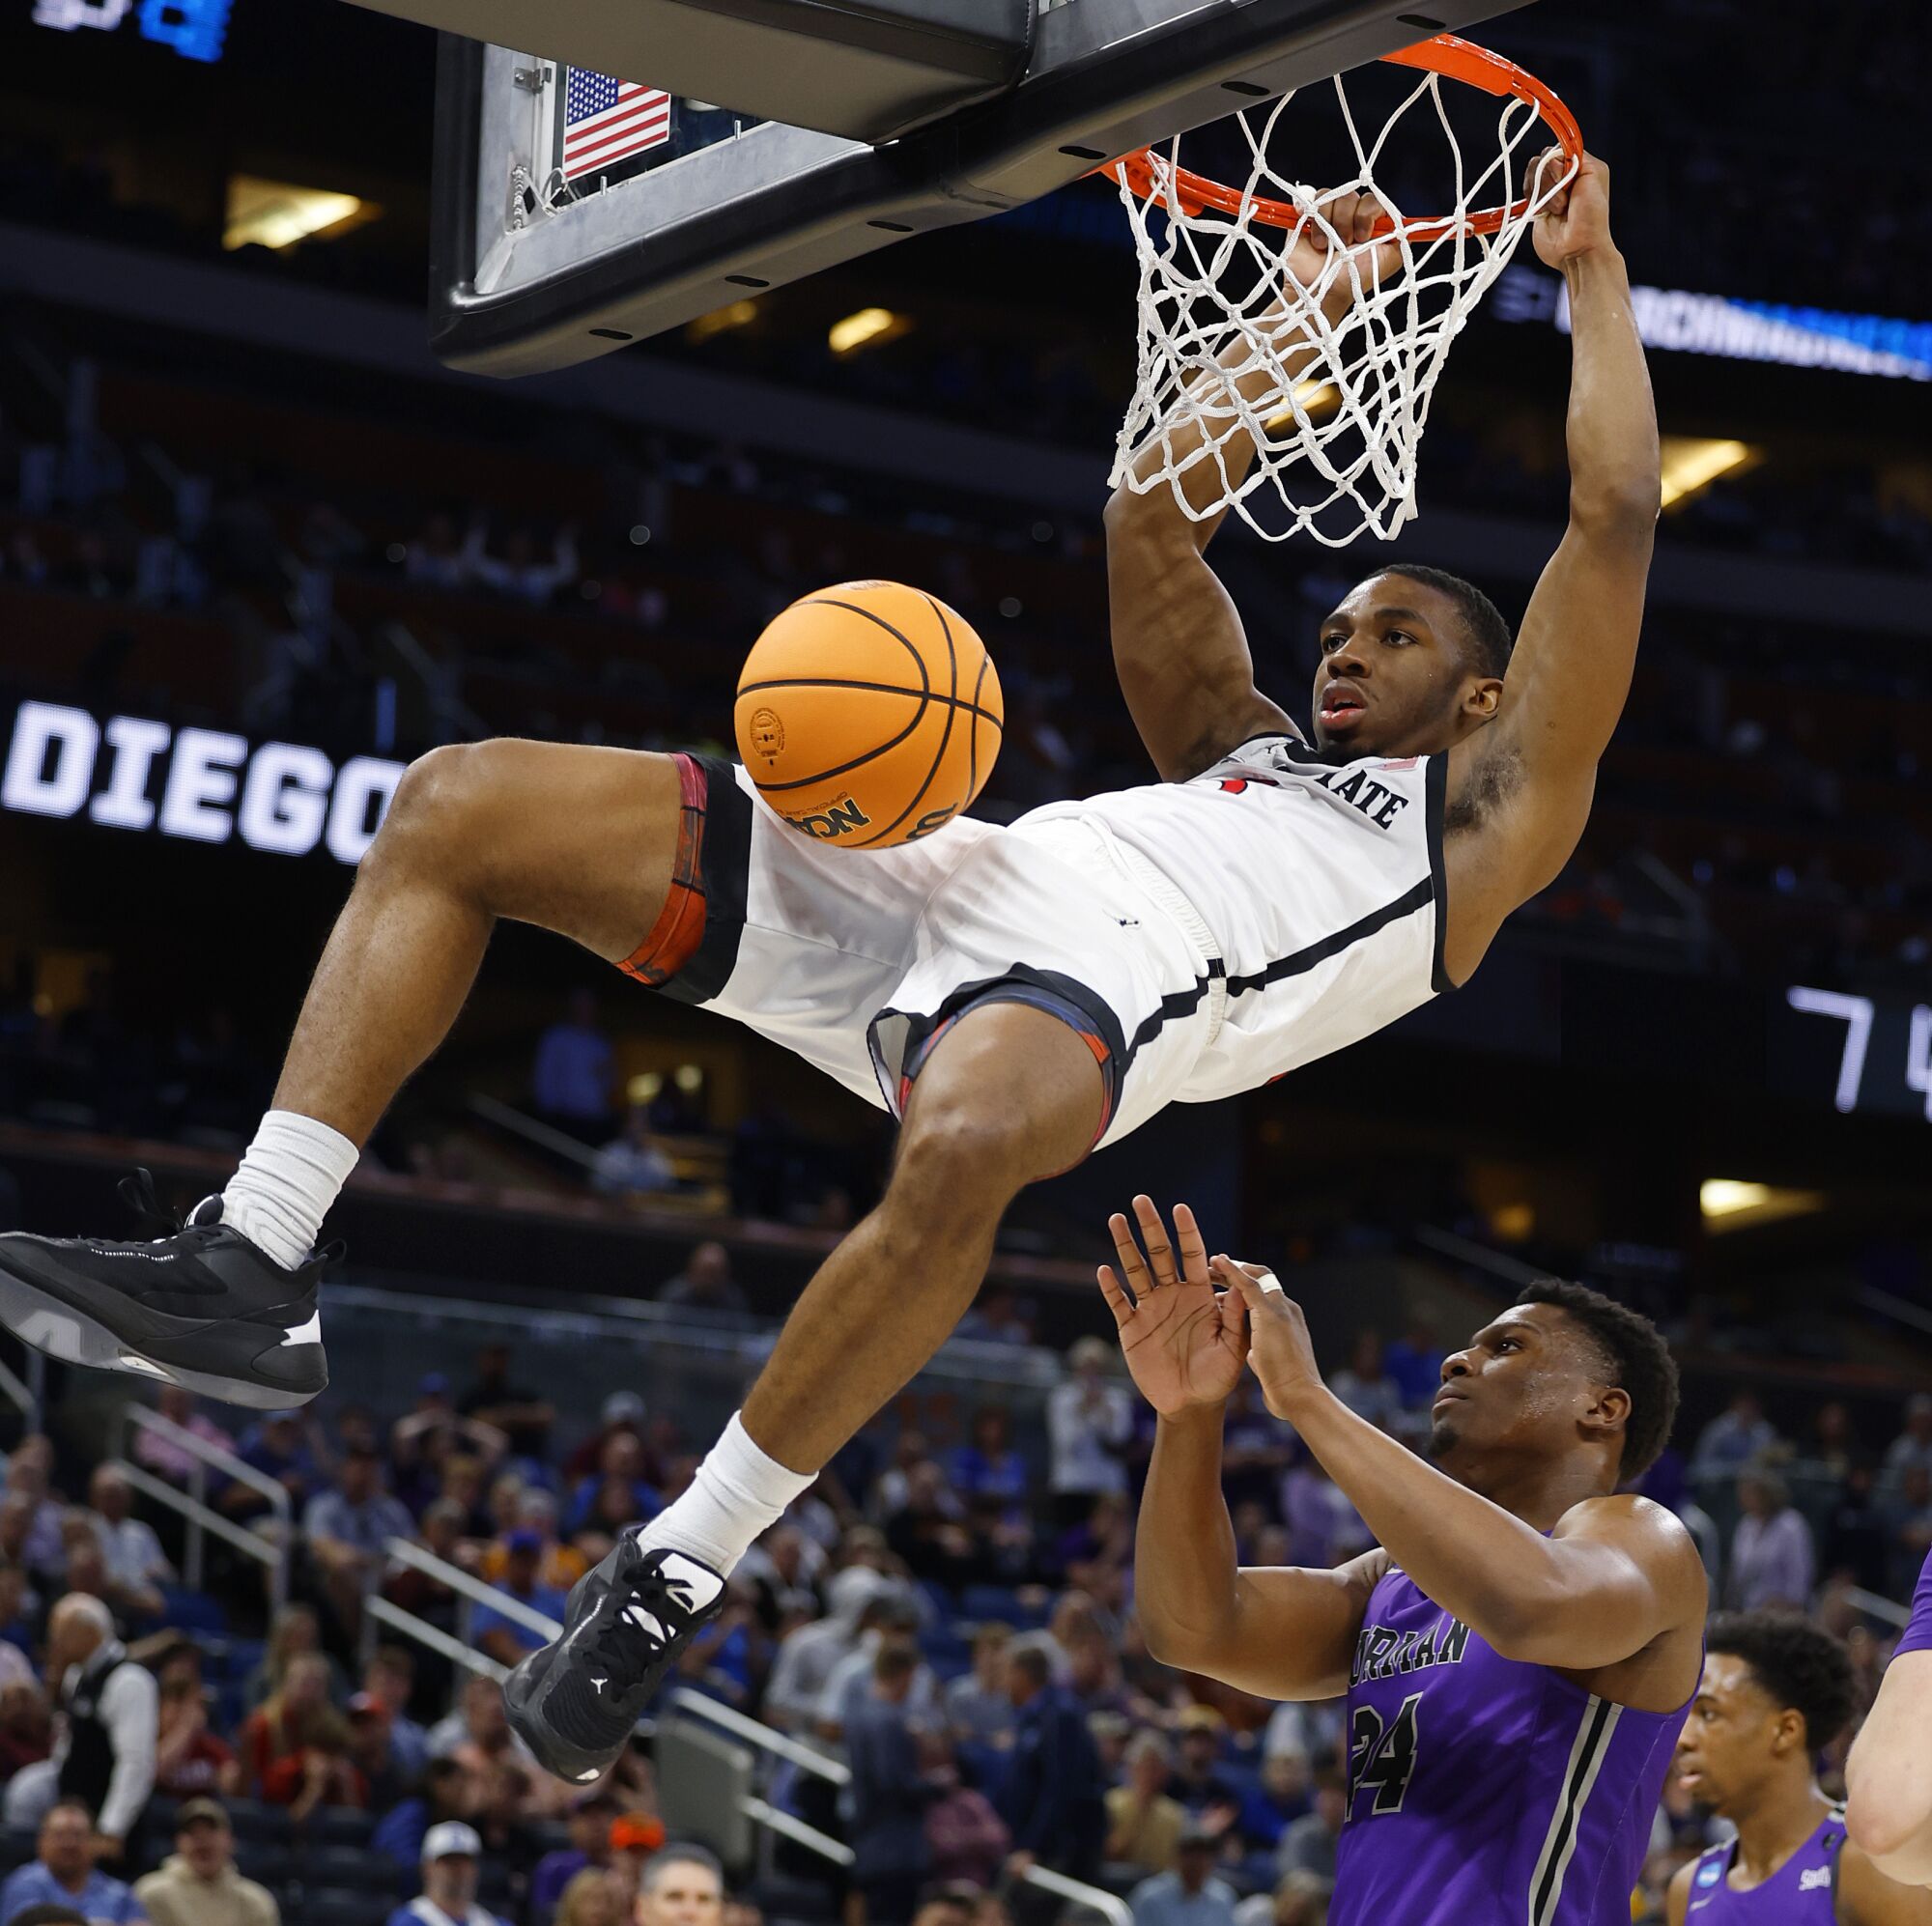 Lamont Butler dunks over Furman's Alex Williams on Saturday during the second round of the NCAA Tournament in Orlando, Fla.